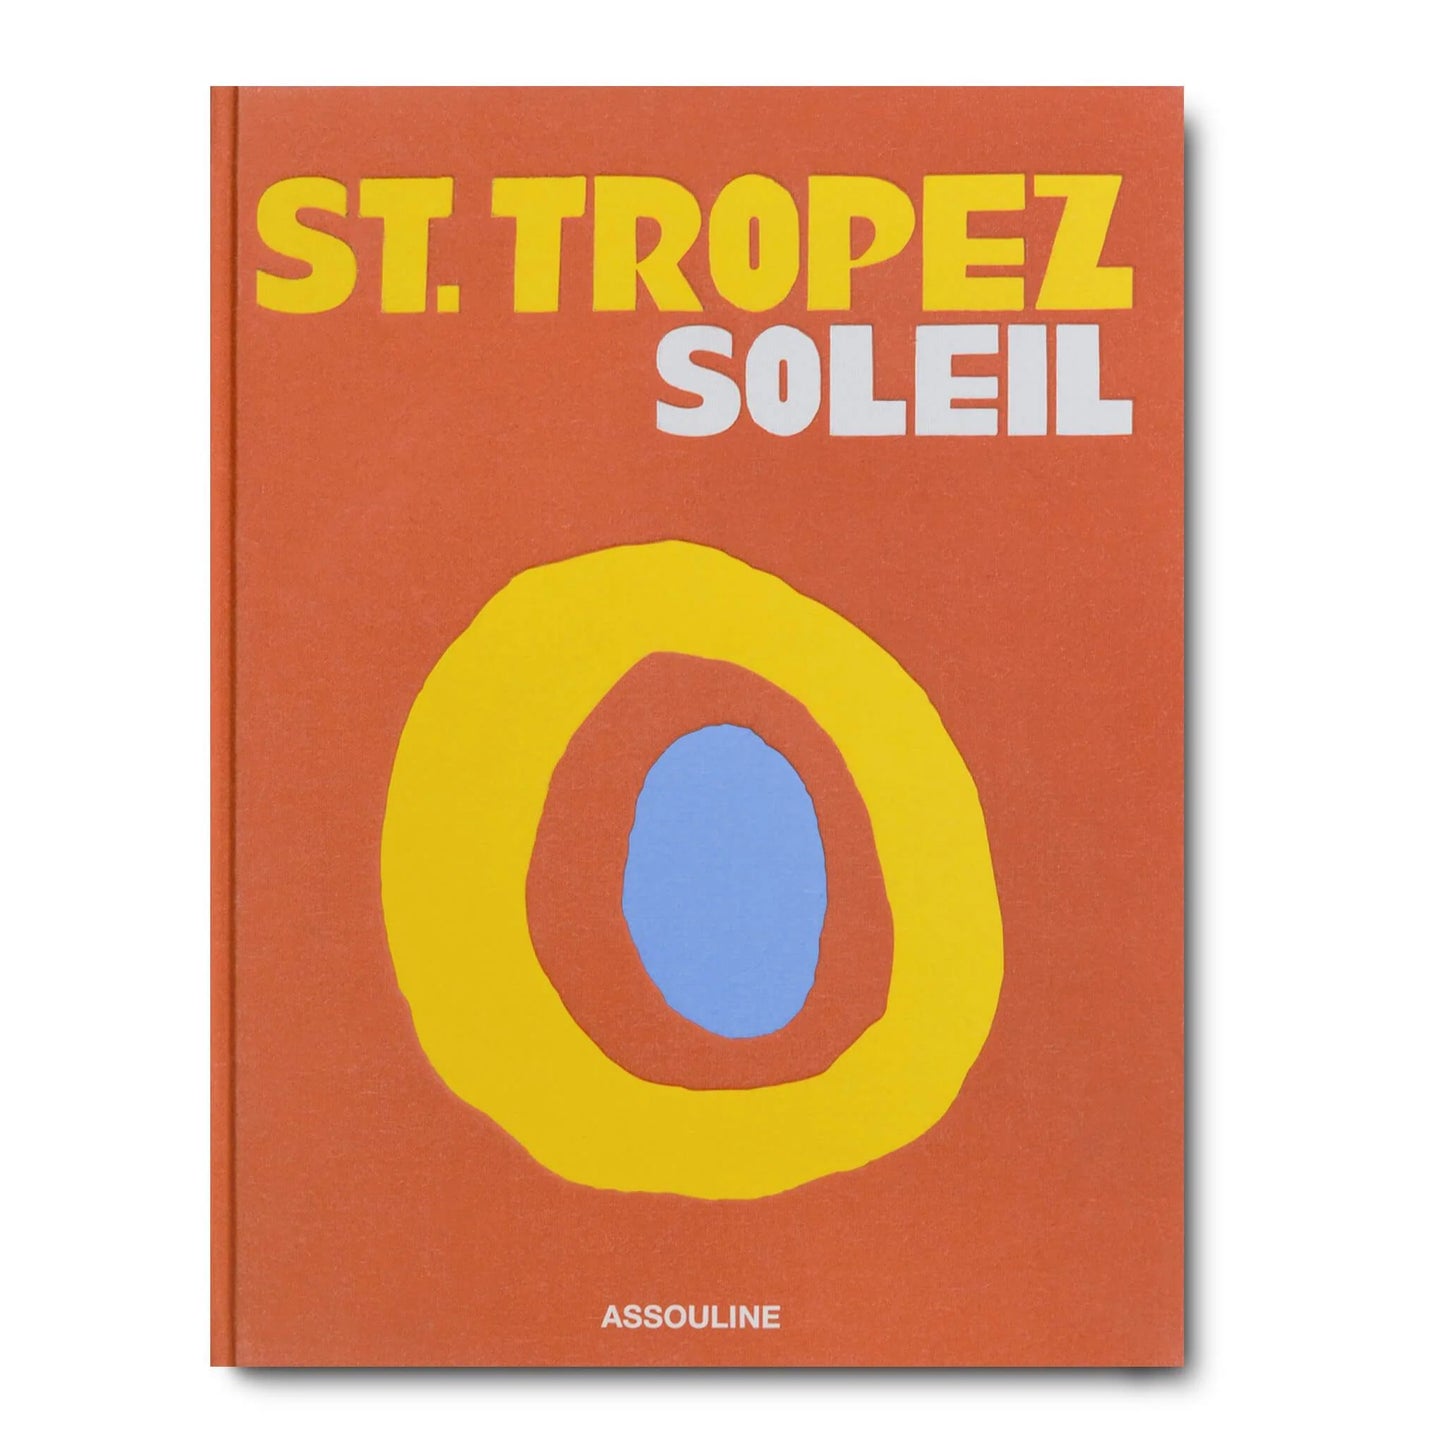 Travel Book Books in St. Tropez Soleil at Wrapsody